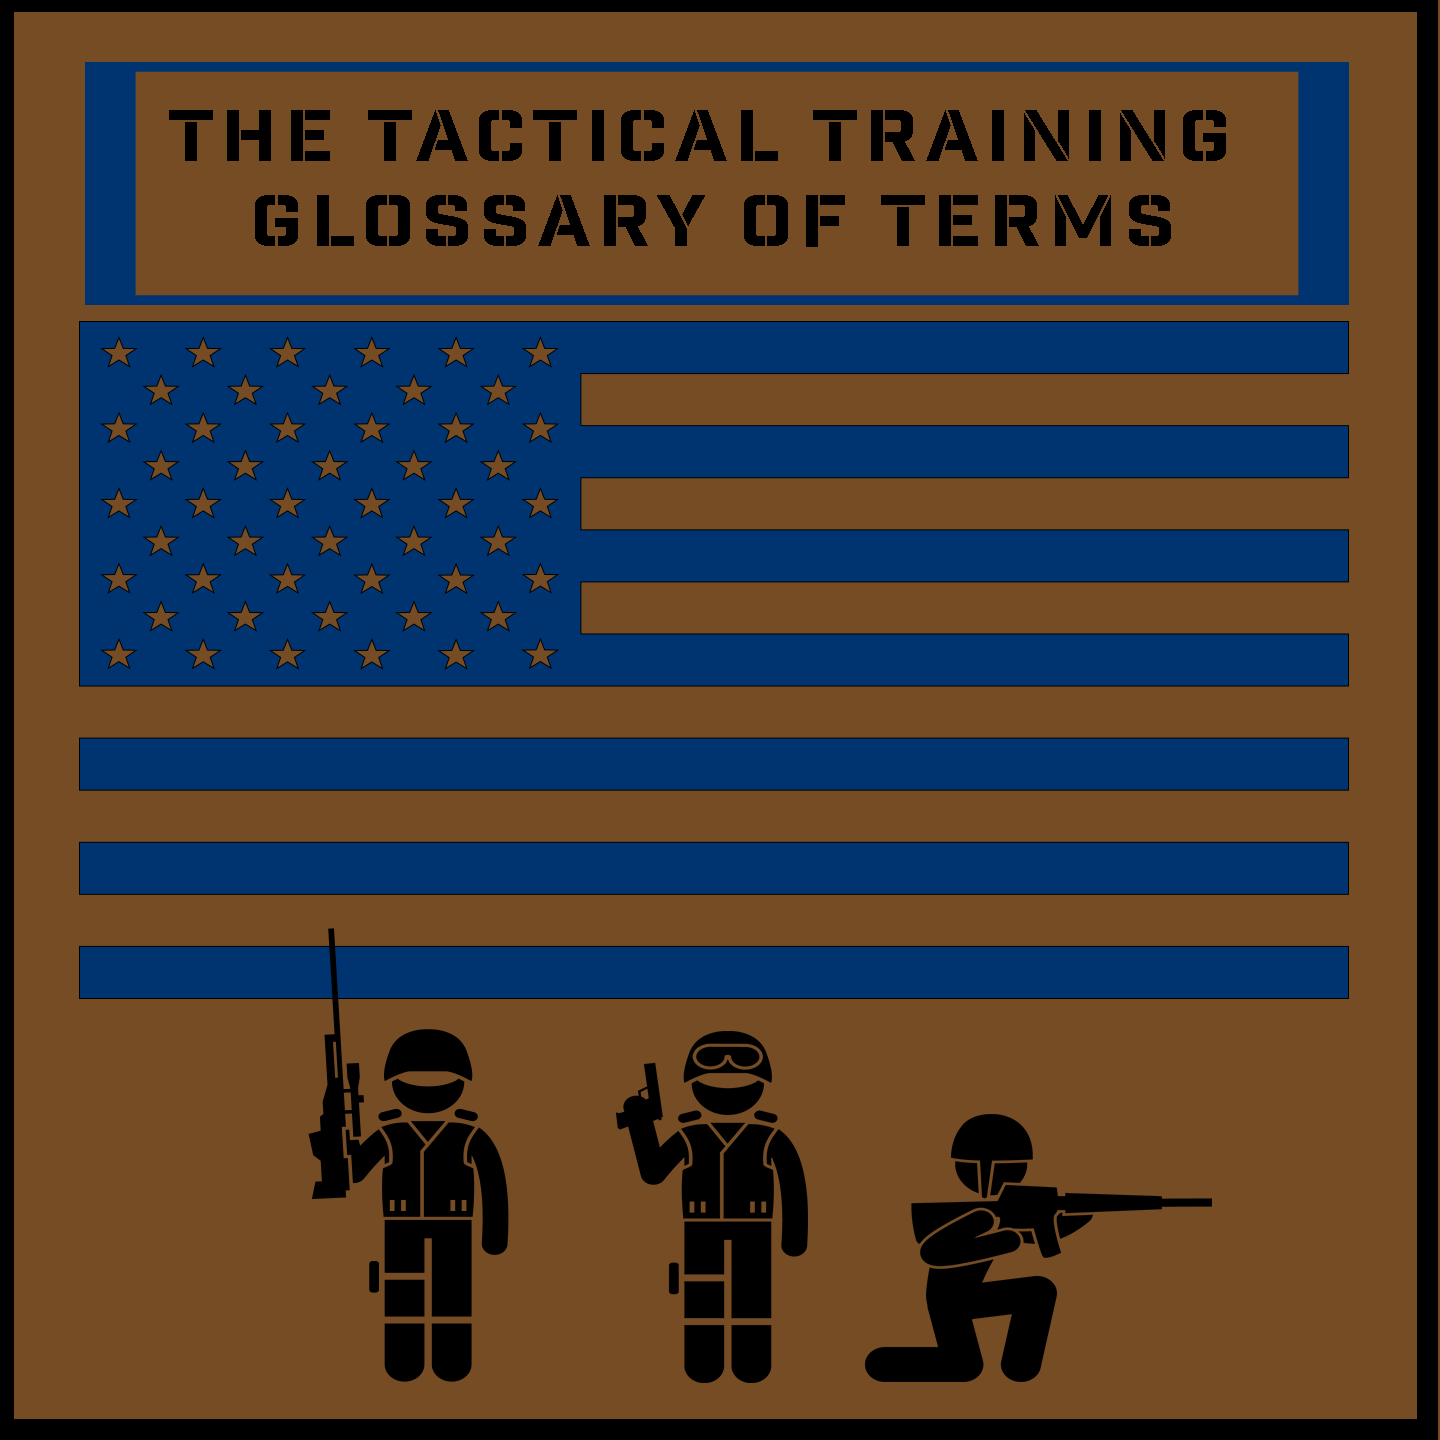 The Tactical Training Glossary of Terms